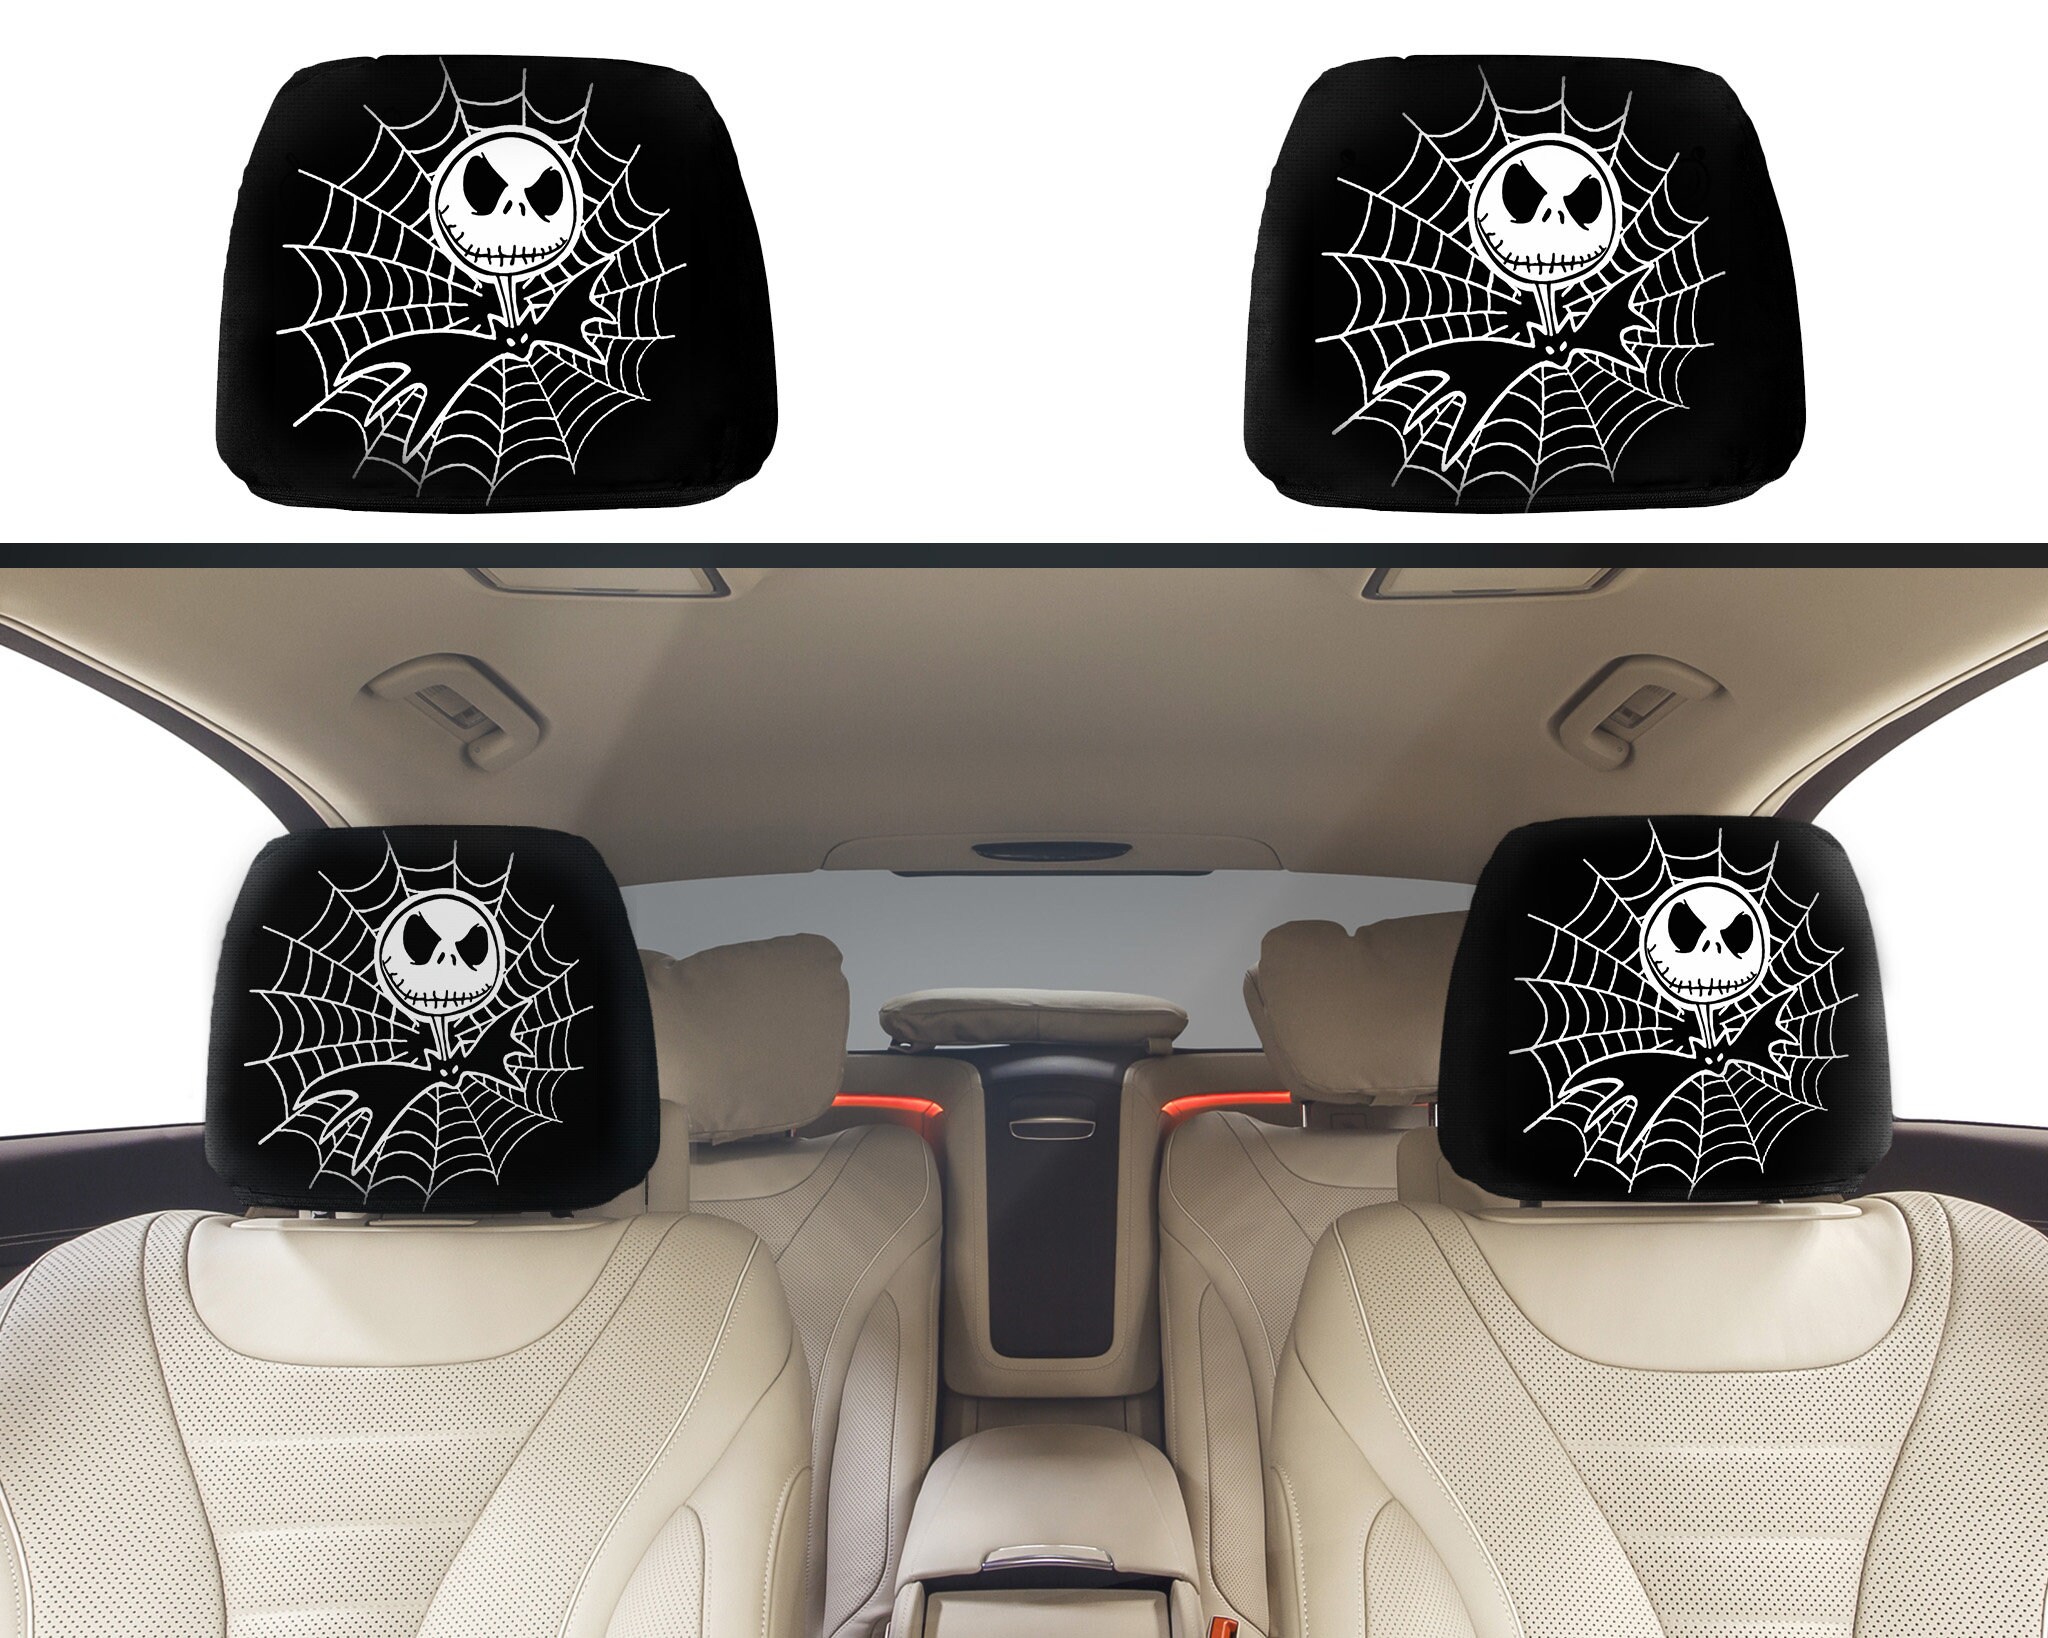 Father's Day Gift, Car Decor Headrest Covers, Jack Skellington Spider Web - Halloween Decor For Car, Holiday Gift, Jack Skellington Print